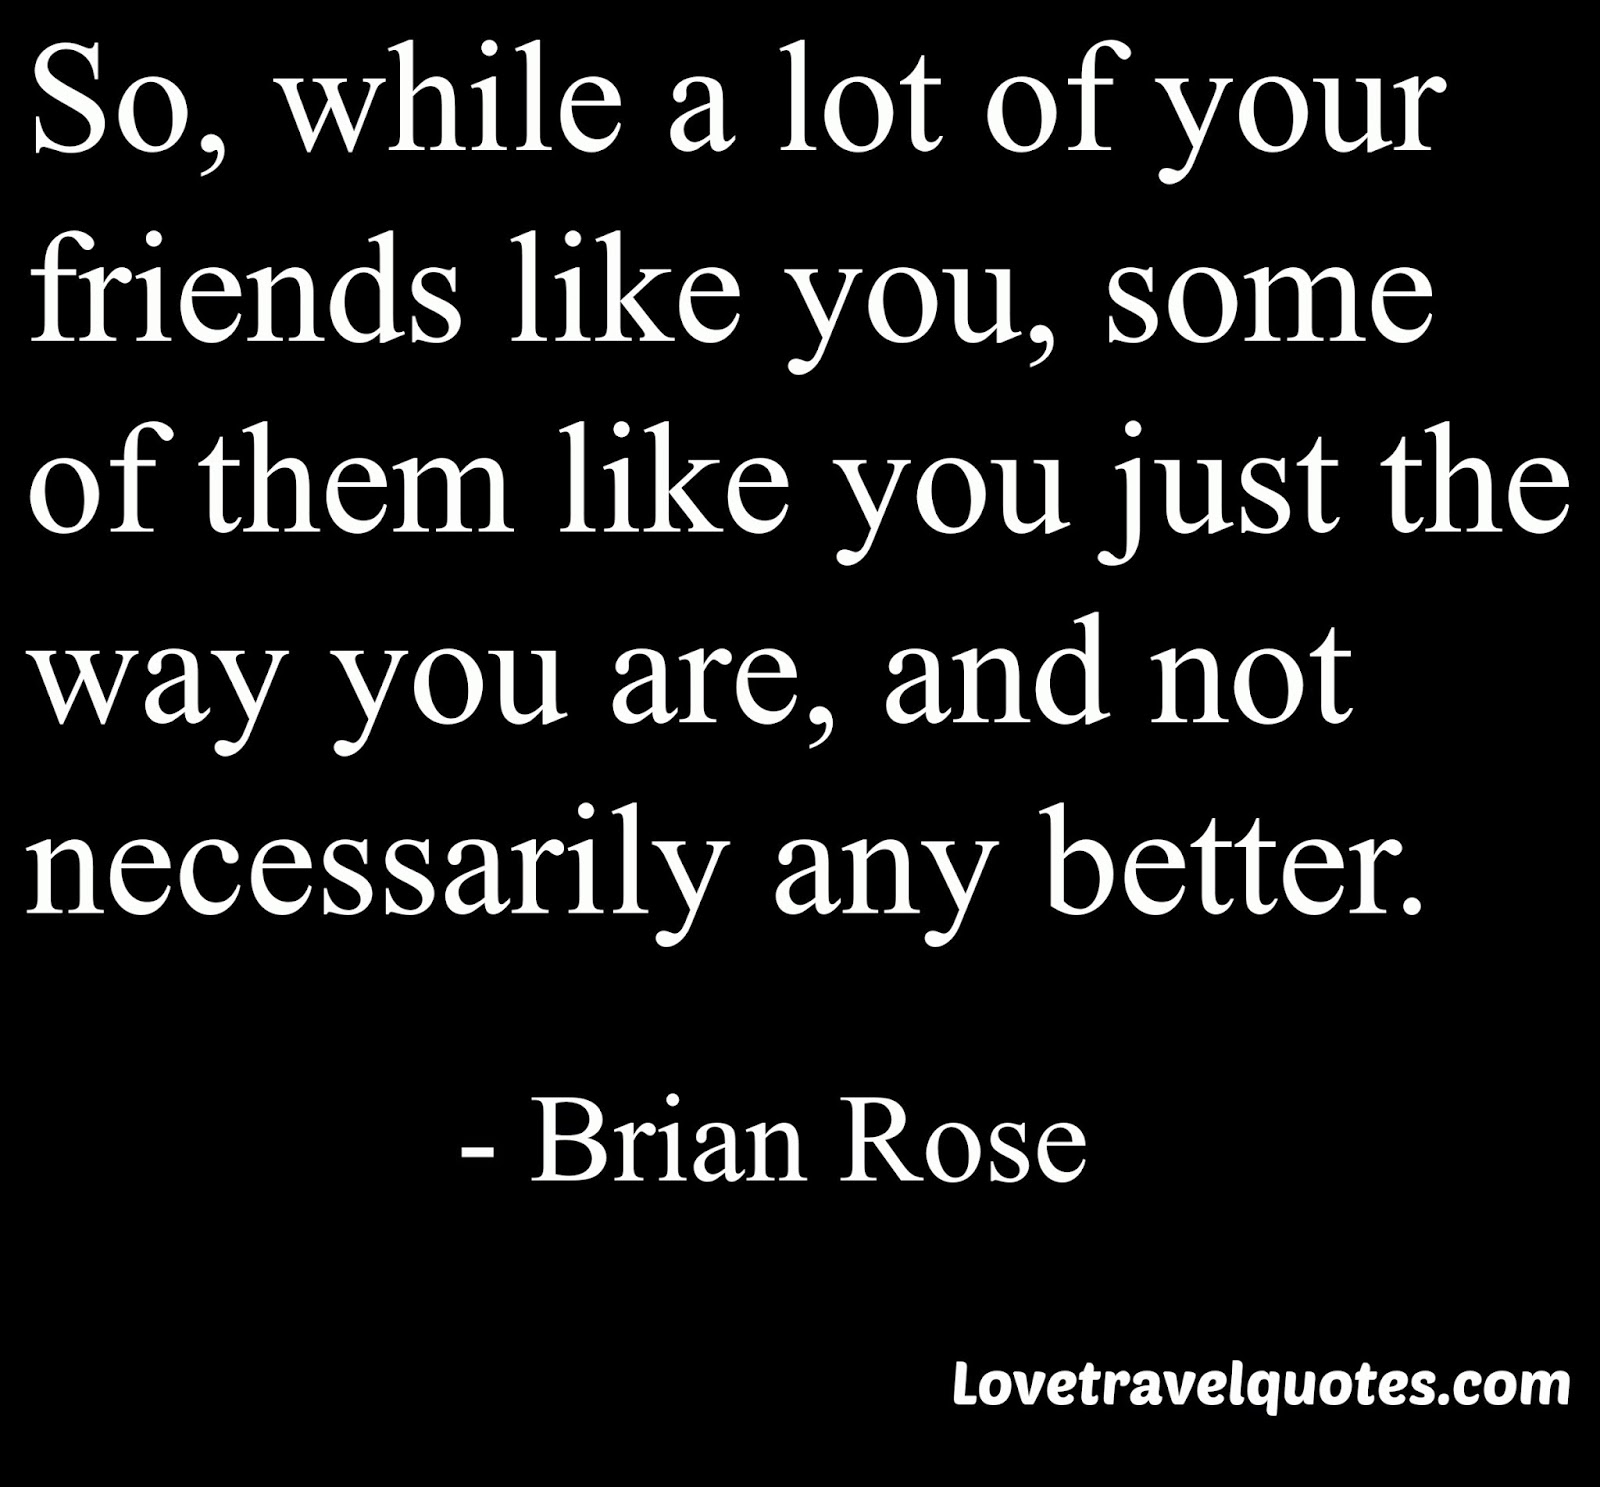 so, while a lot of your friends like you, some of them like you just the way you are, and not necessarily any better